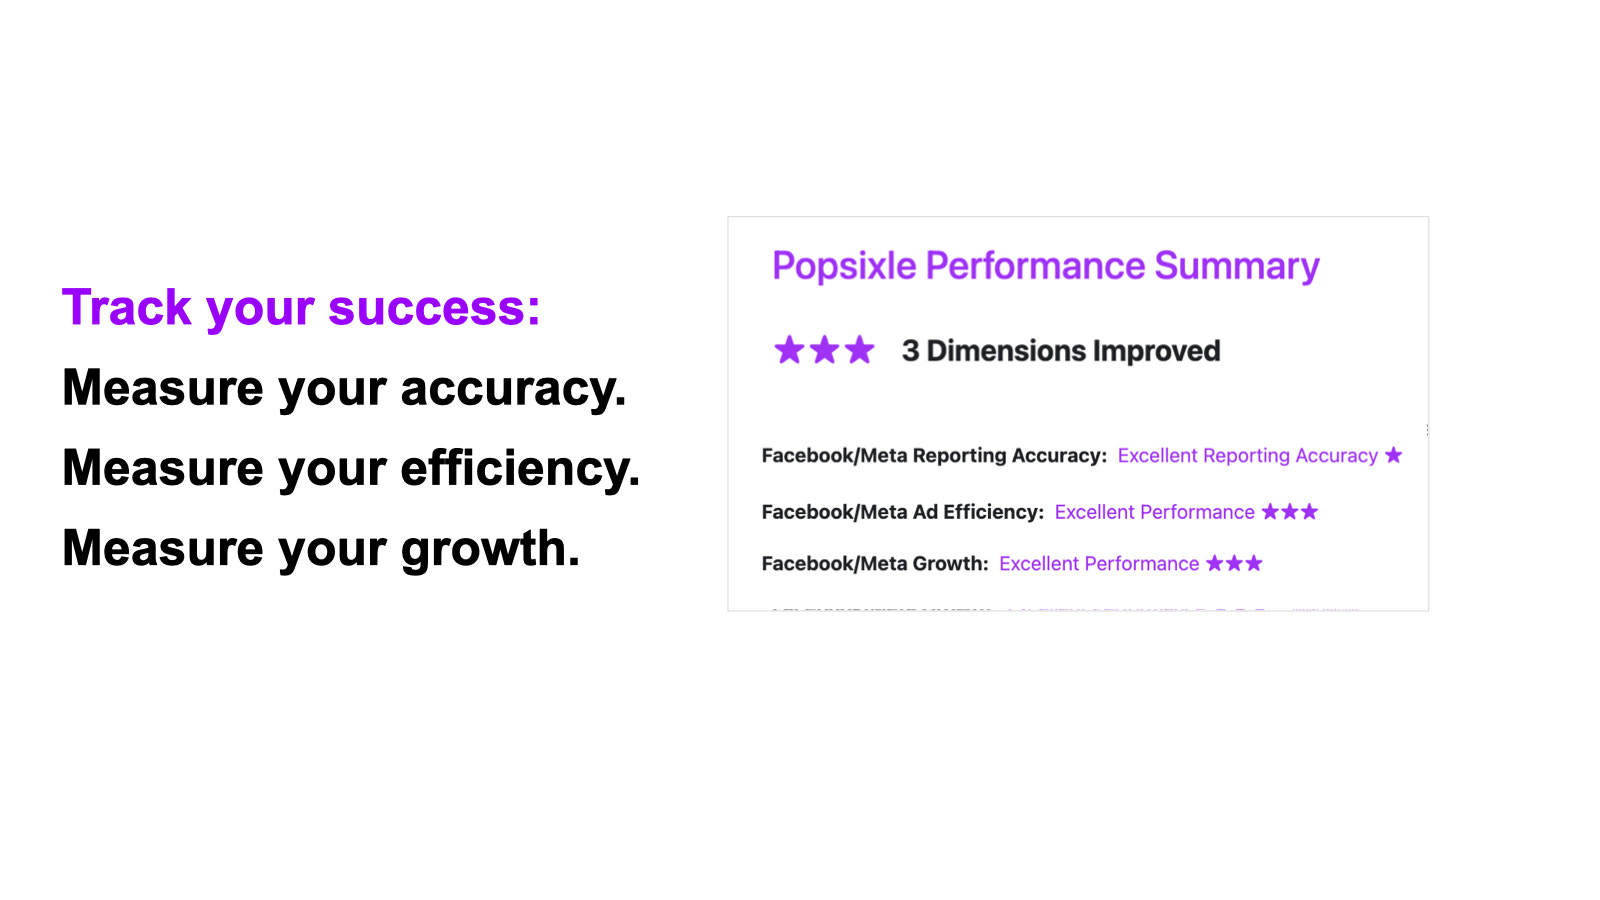 Track Your Success with Popsixle